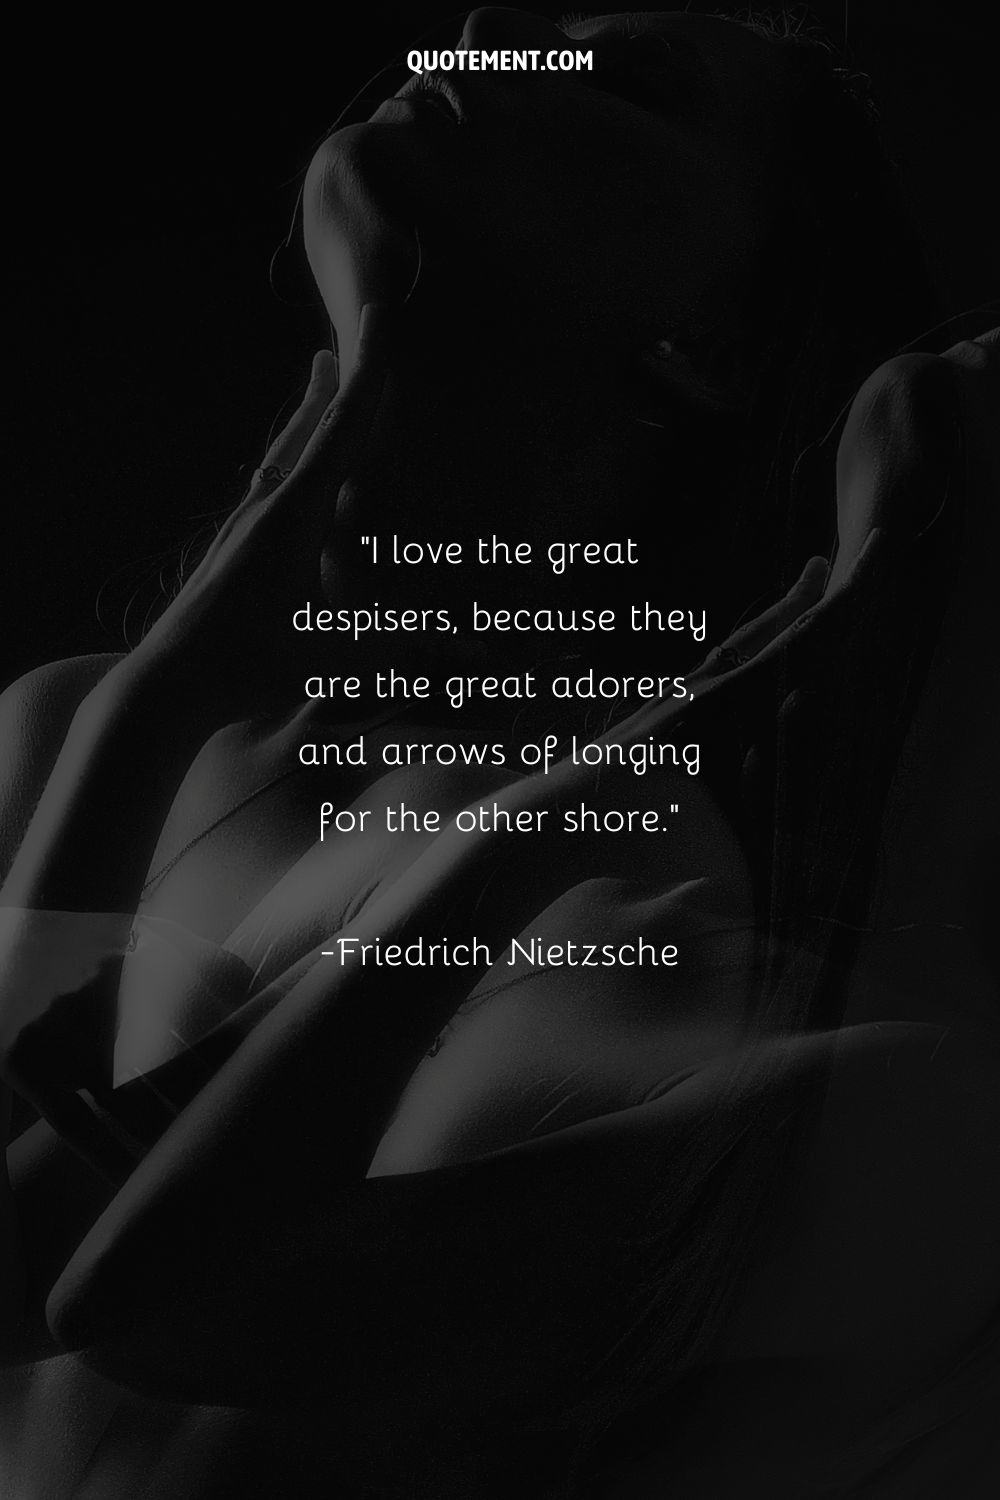 monochrome image of a woman representing a quote on great despisers by Friedrich Nietzsche